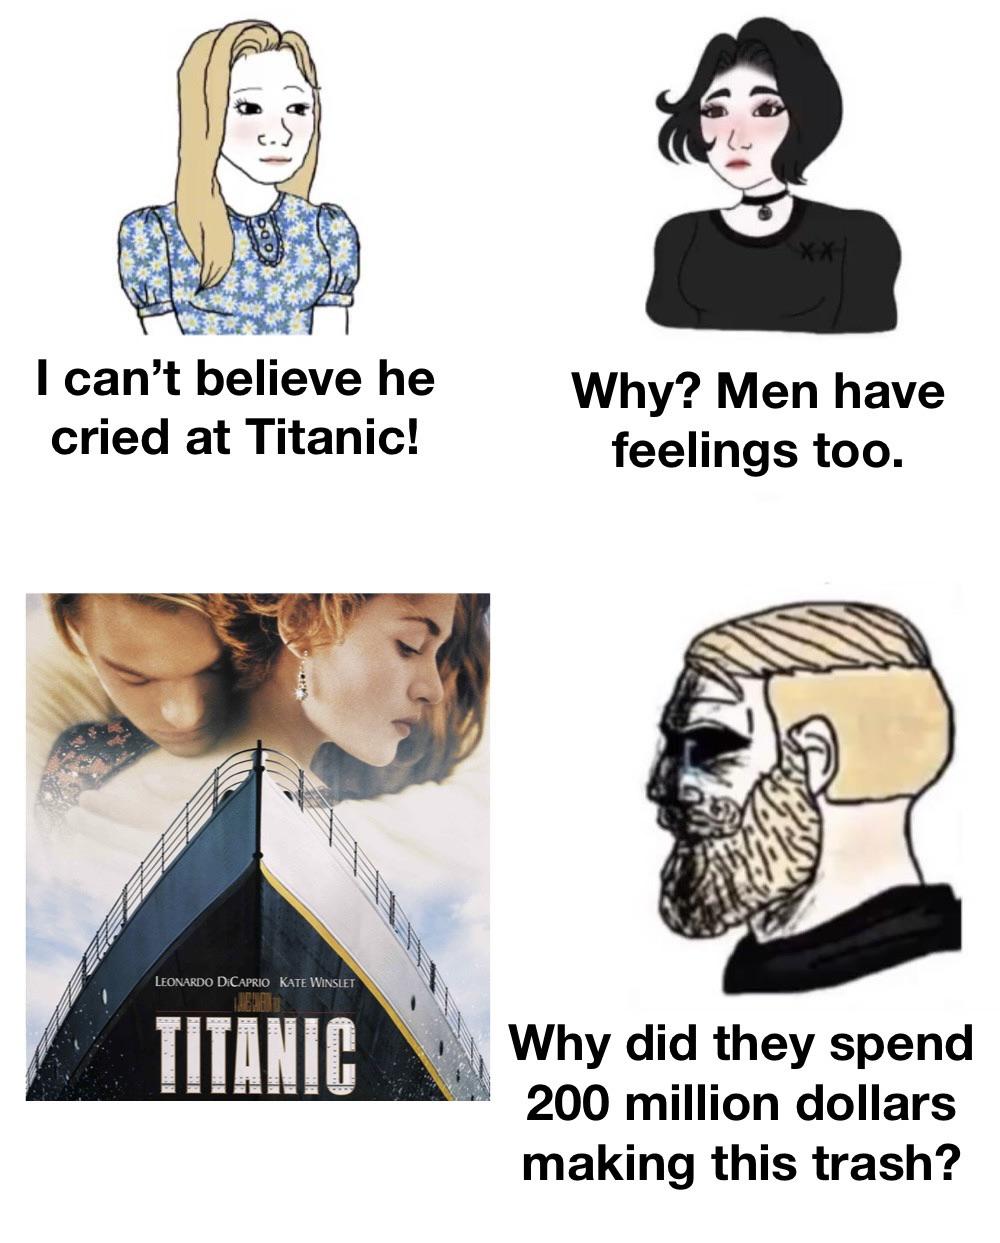 dantdm minecraft hardcore memes - I can't believe he cried at Titanic! Why? Men have feelings too. Leonardo Dicaprio Kate Winslet Titanic Why did they spend 200 million dollars making this trash?